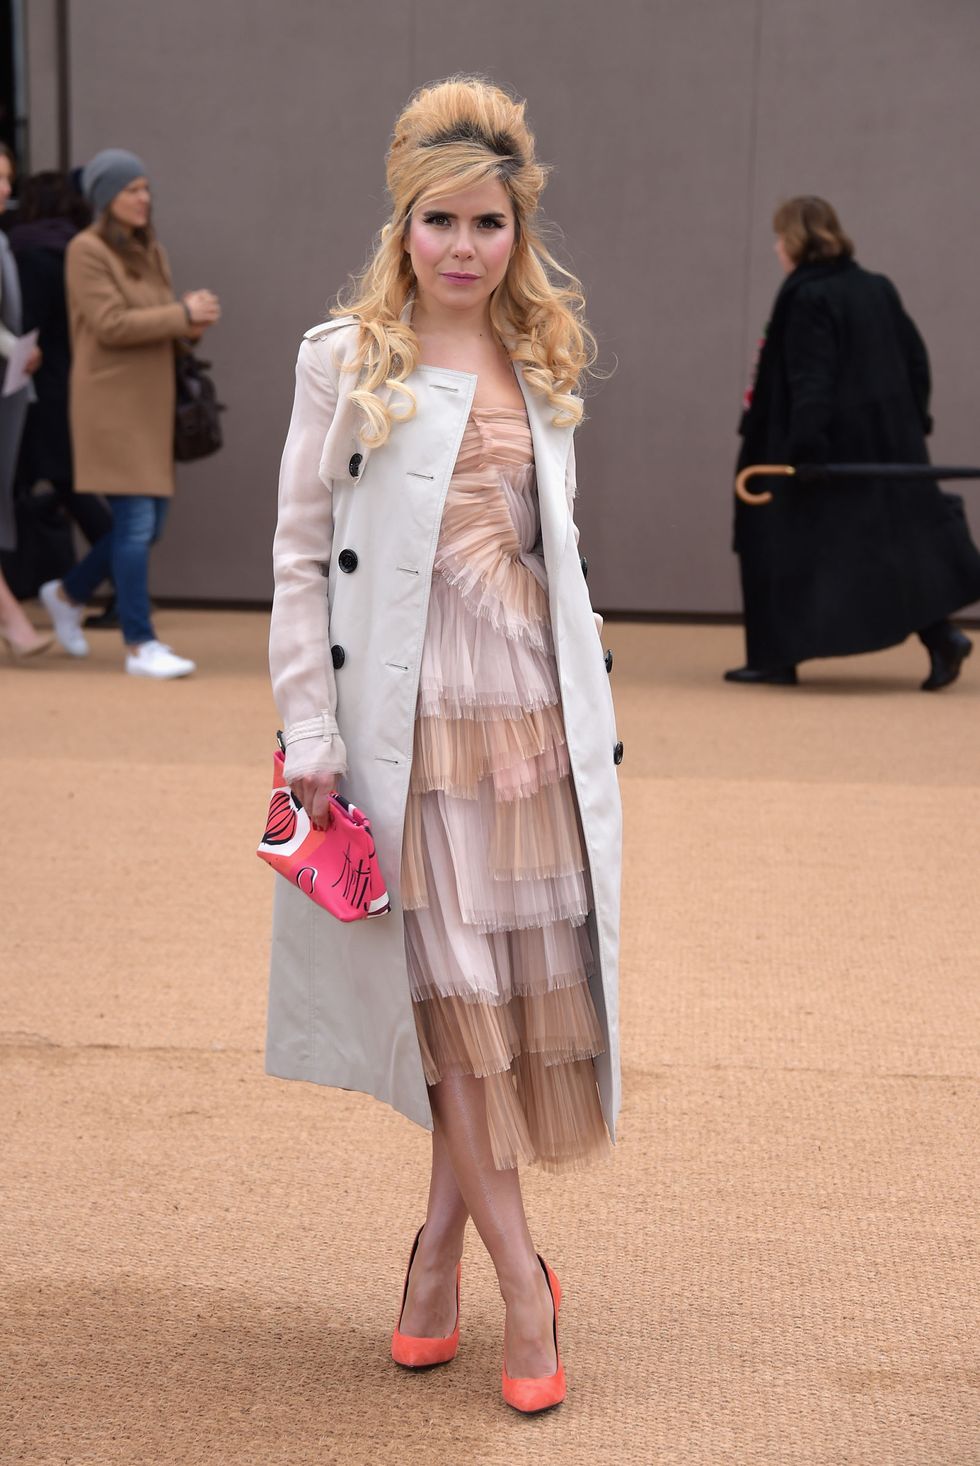 London Fashion Week AW15: what the celebrities are wearing on the front row - Paloma Faith